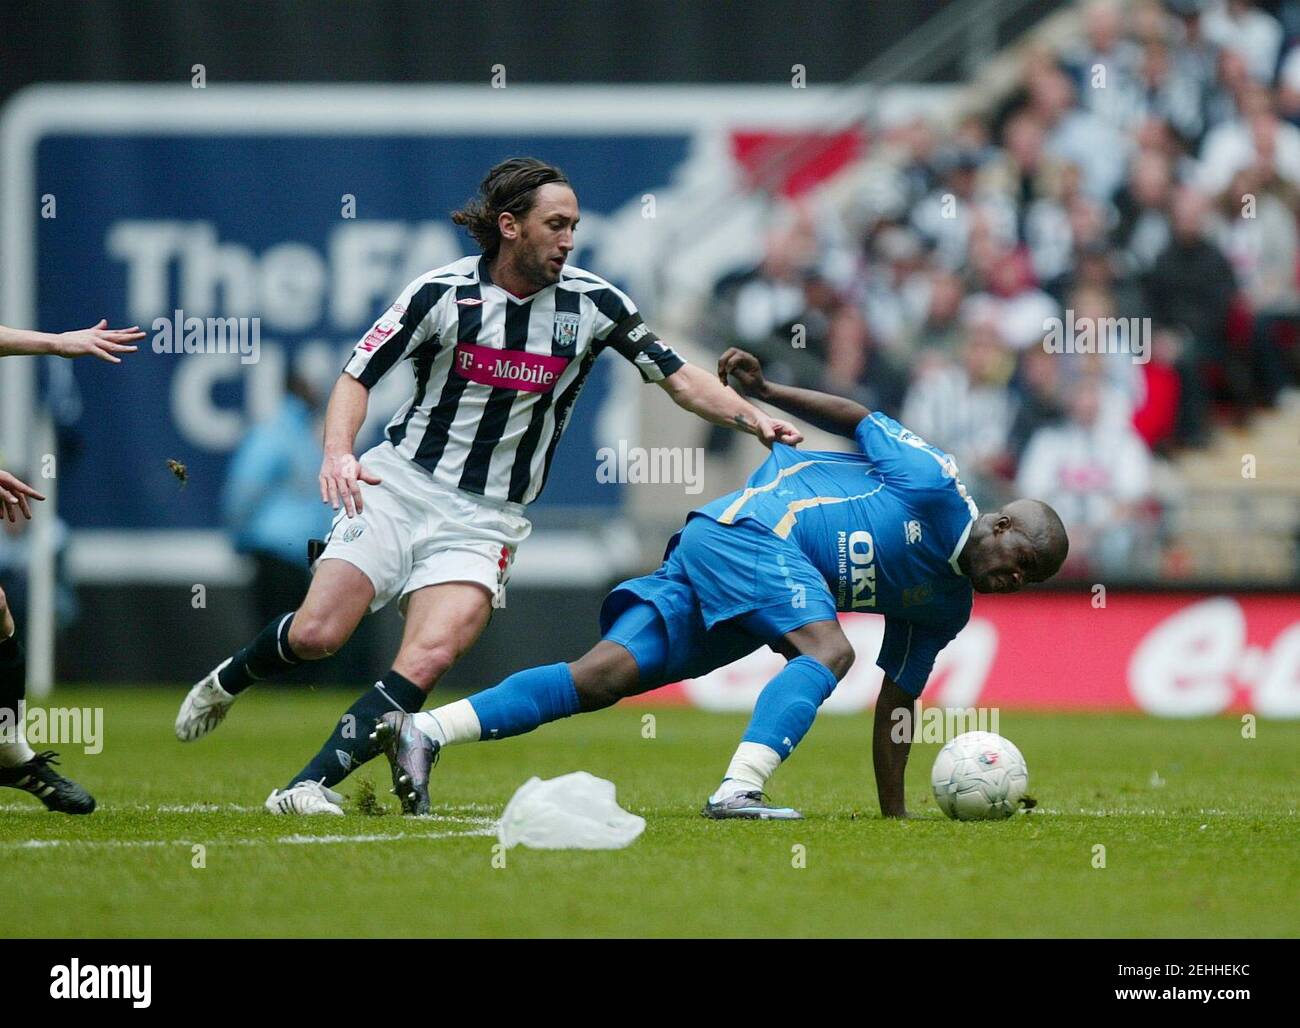 Football - Portsmouth v West Bromwich Albion - FA Cup Semi Final - Wembley Stadium - 07/08 - 5/4/08  Portsmouth's Lassana Diarra in action against West Bromwich Albion's Jonathan Greening (L)  Mandatory Credit: Action Images / Peter Cziborra Stock Photo